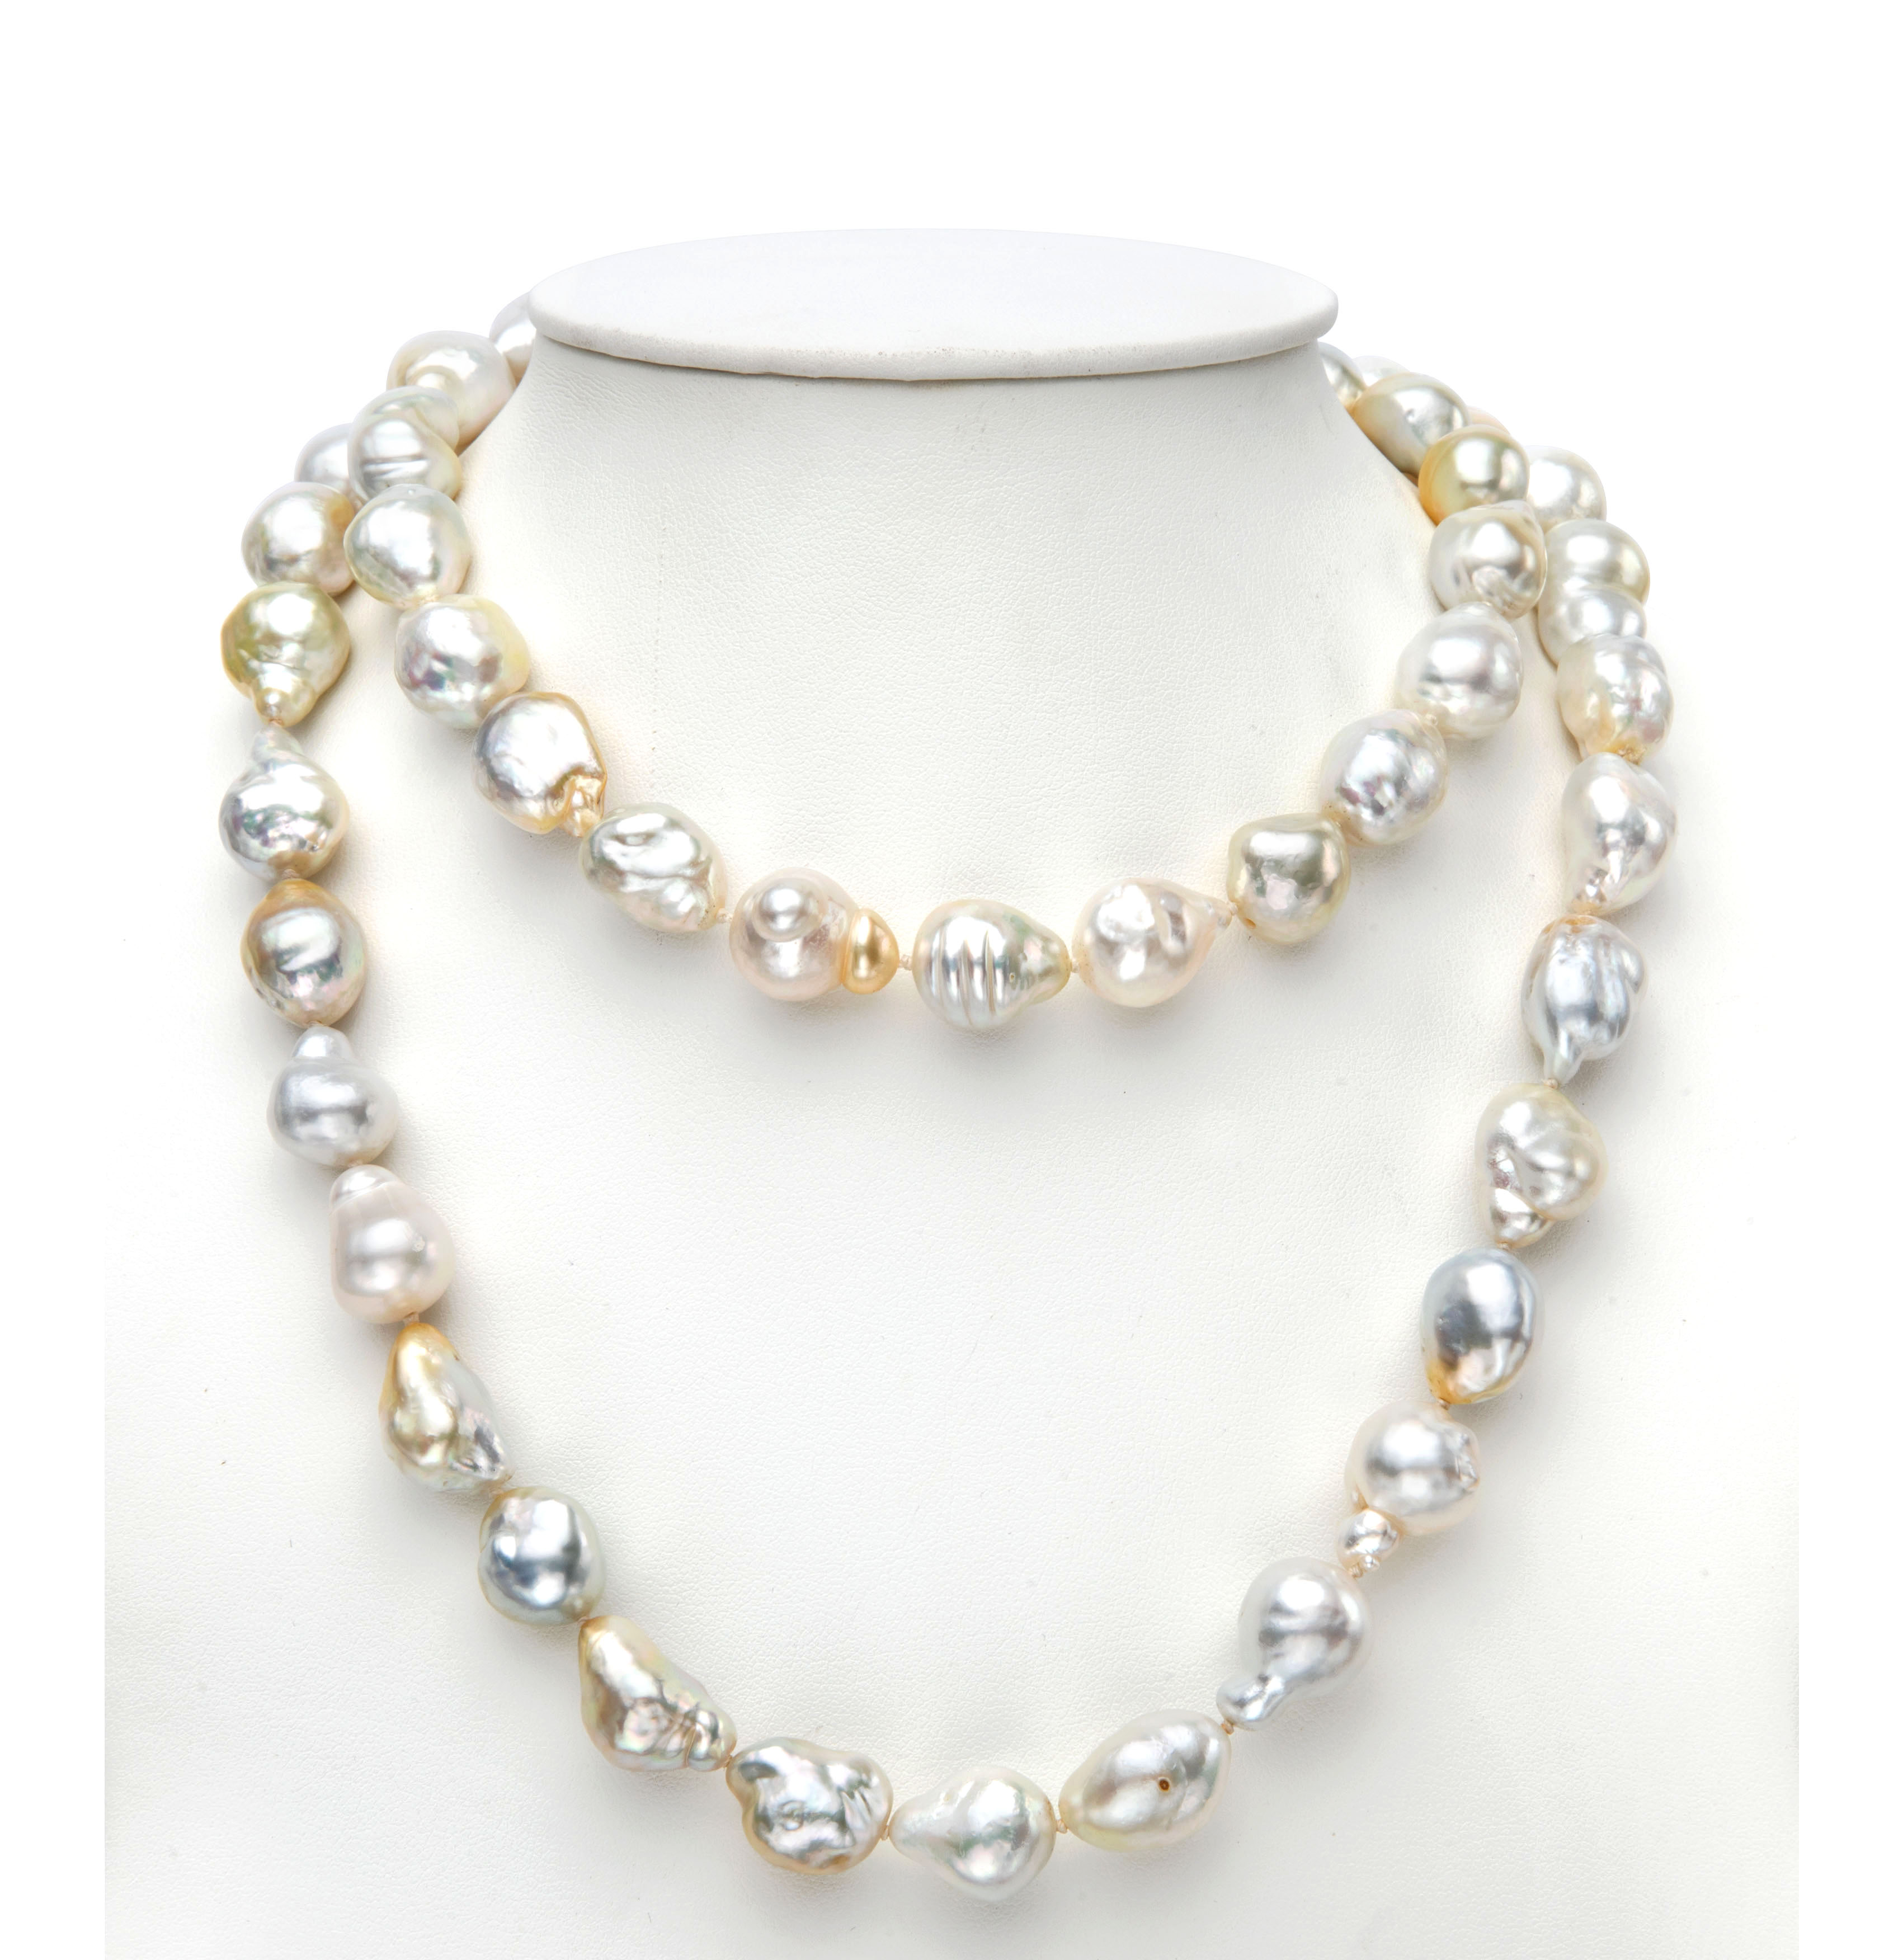 JYX 10-11mm Oval Cultured White Freshwater Pearl Necklace Strand 32